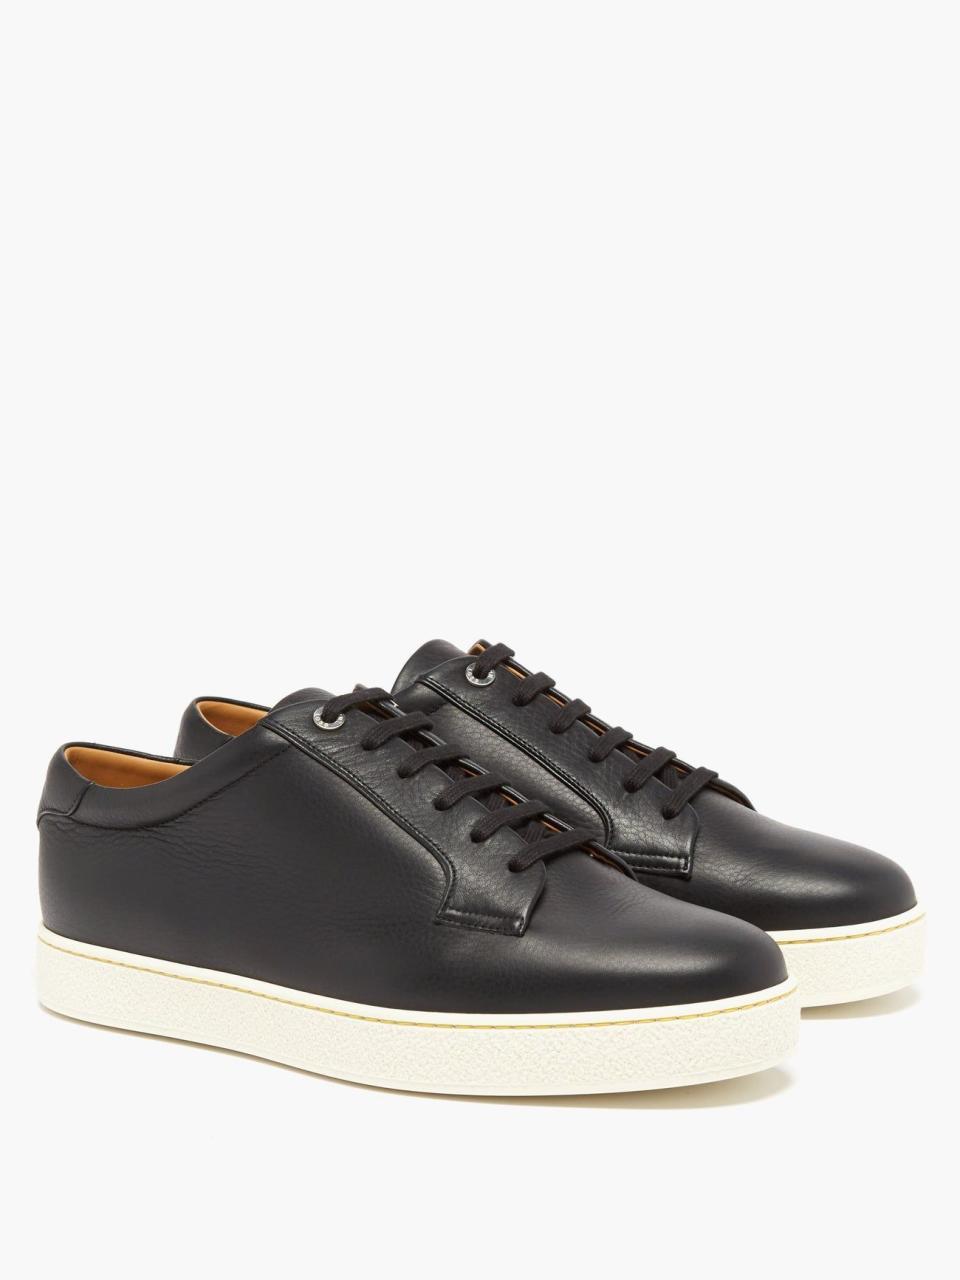 1) Molton Leather Trainers